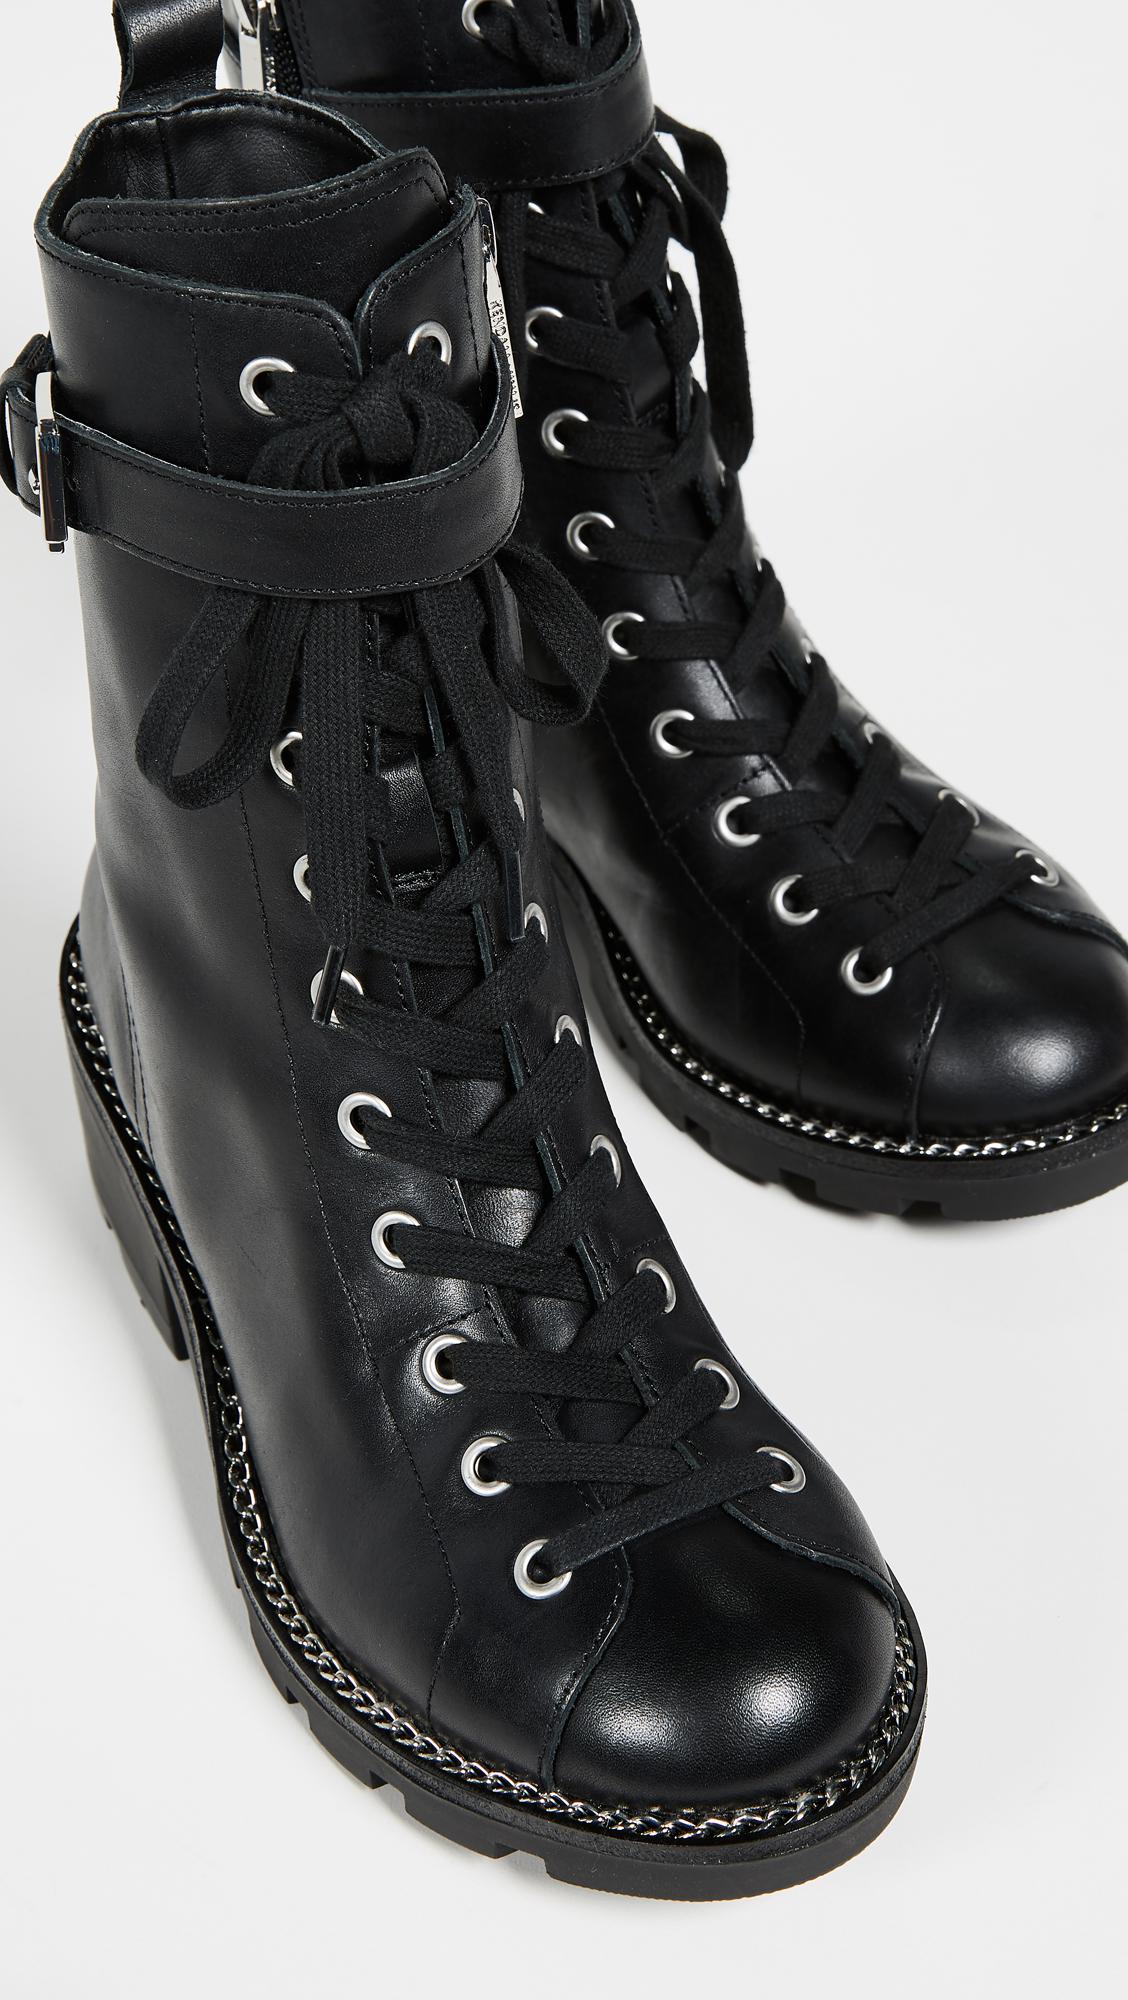 Lyst Kendall + Kylie Prime Combat Boots in Black